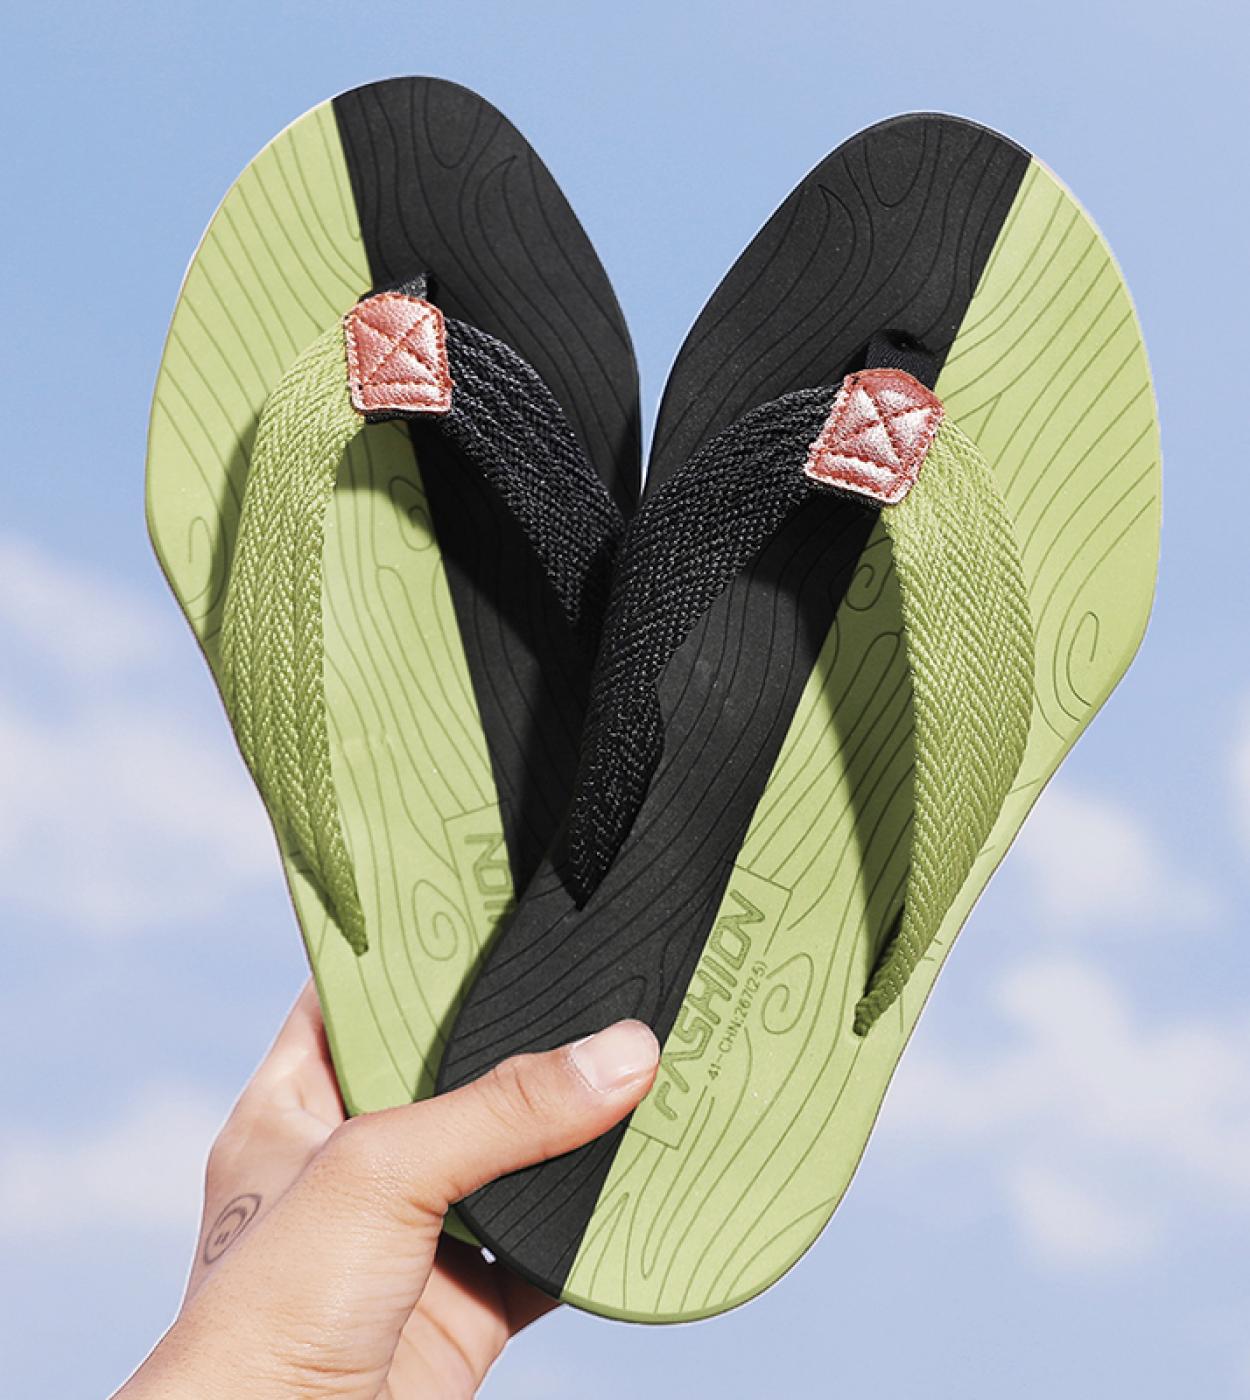 Men Flip Flops Summer Beach Slippers Men Casual Breathable Thicken Beach Sandals Outdoor Massage Slippers Casual Shoes 2